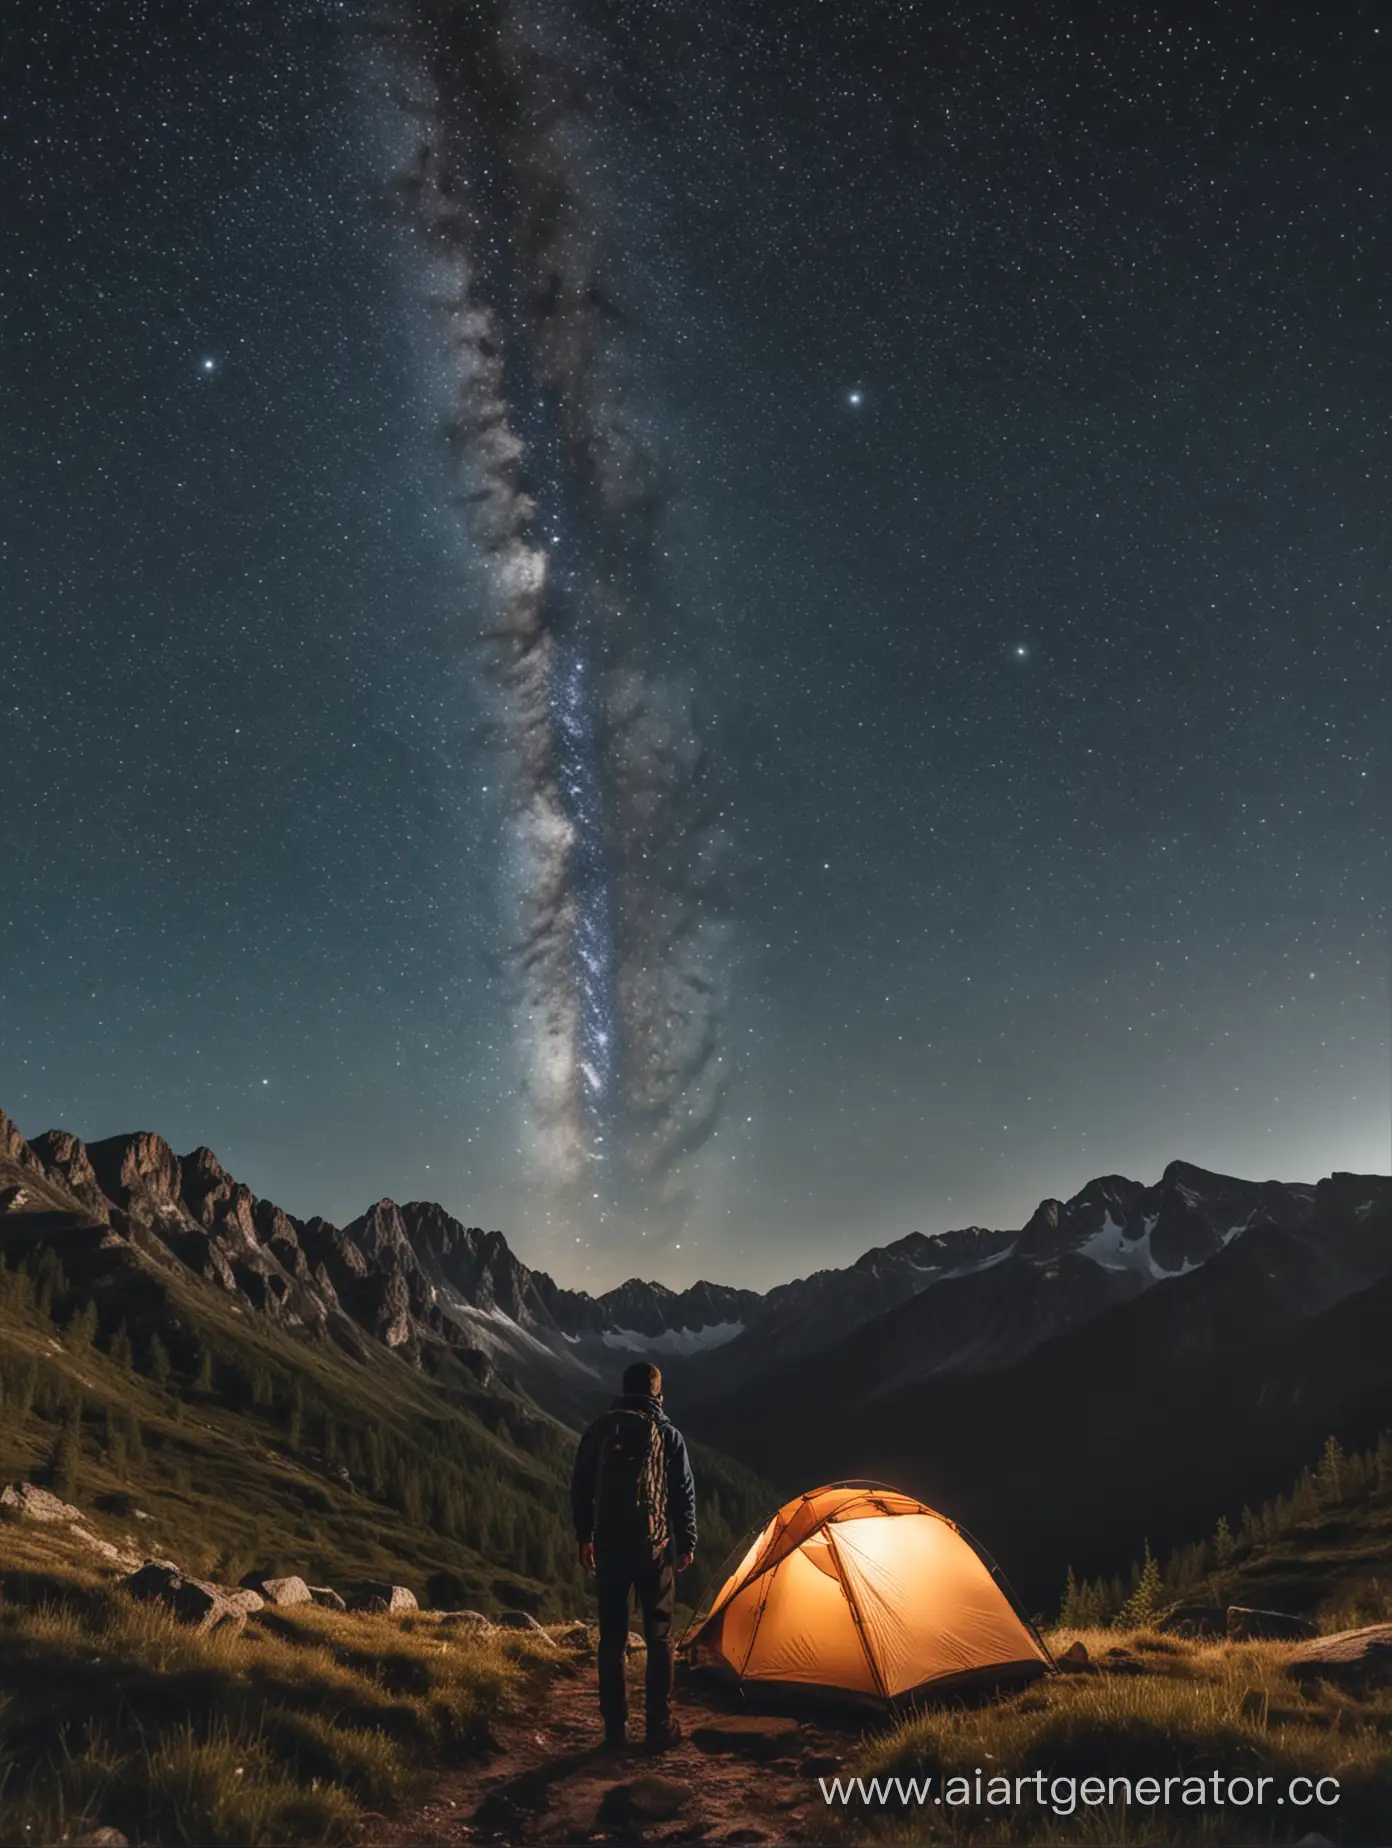 Night-Sky-Camping-Backpacker-Gazing-at-Starry-Mountains